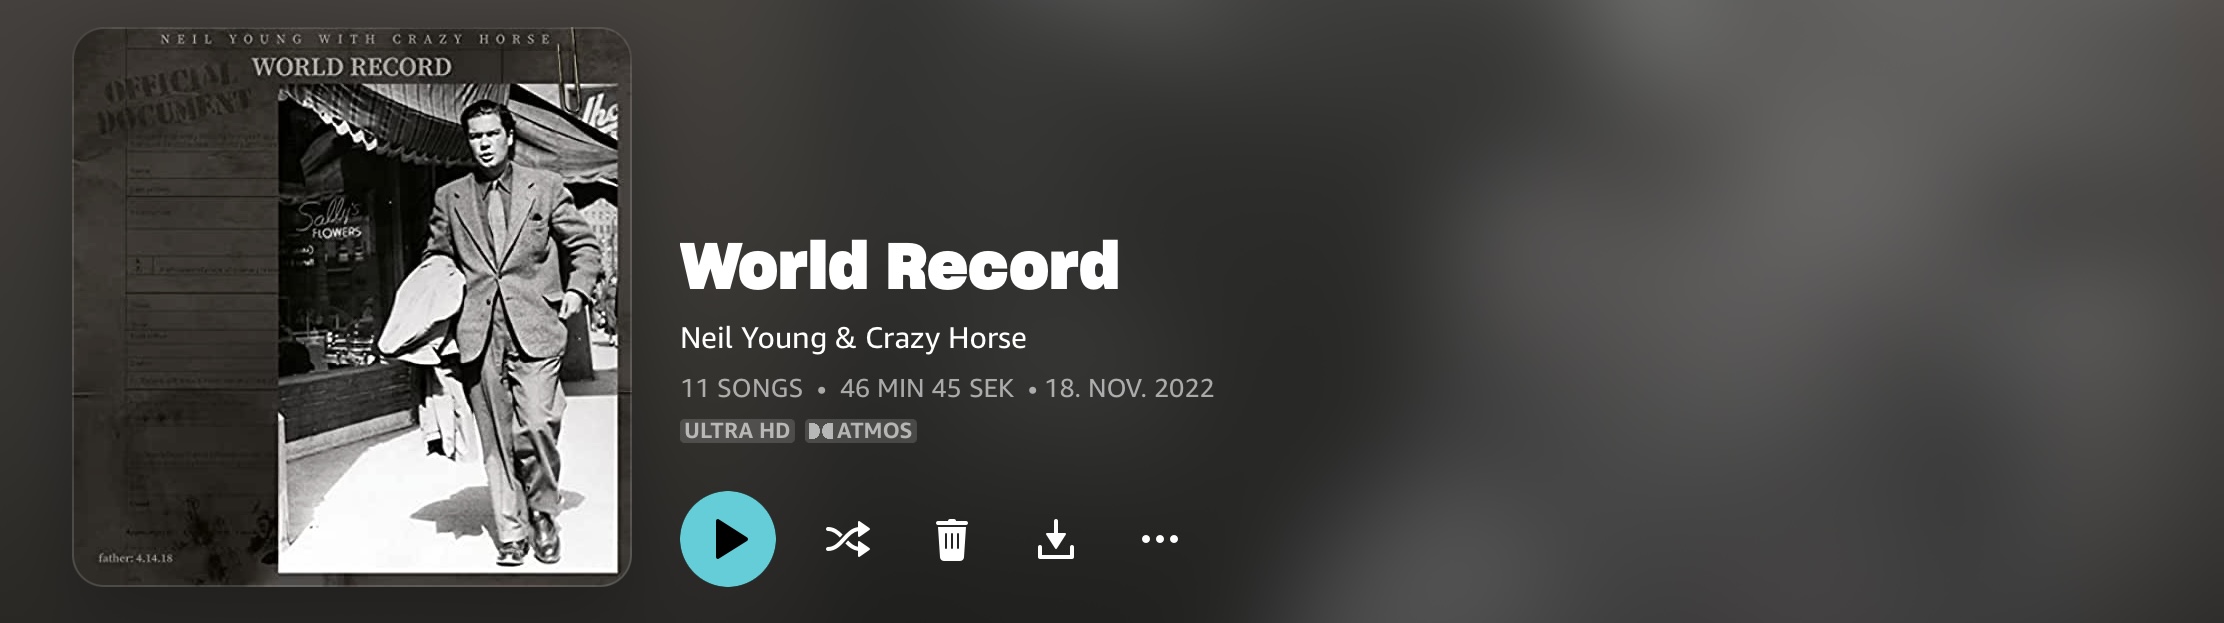 Neil Young World Record Dolby Atmos